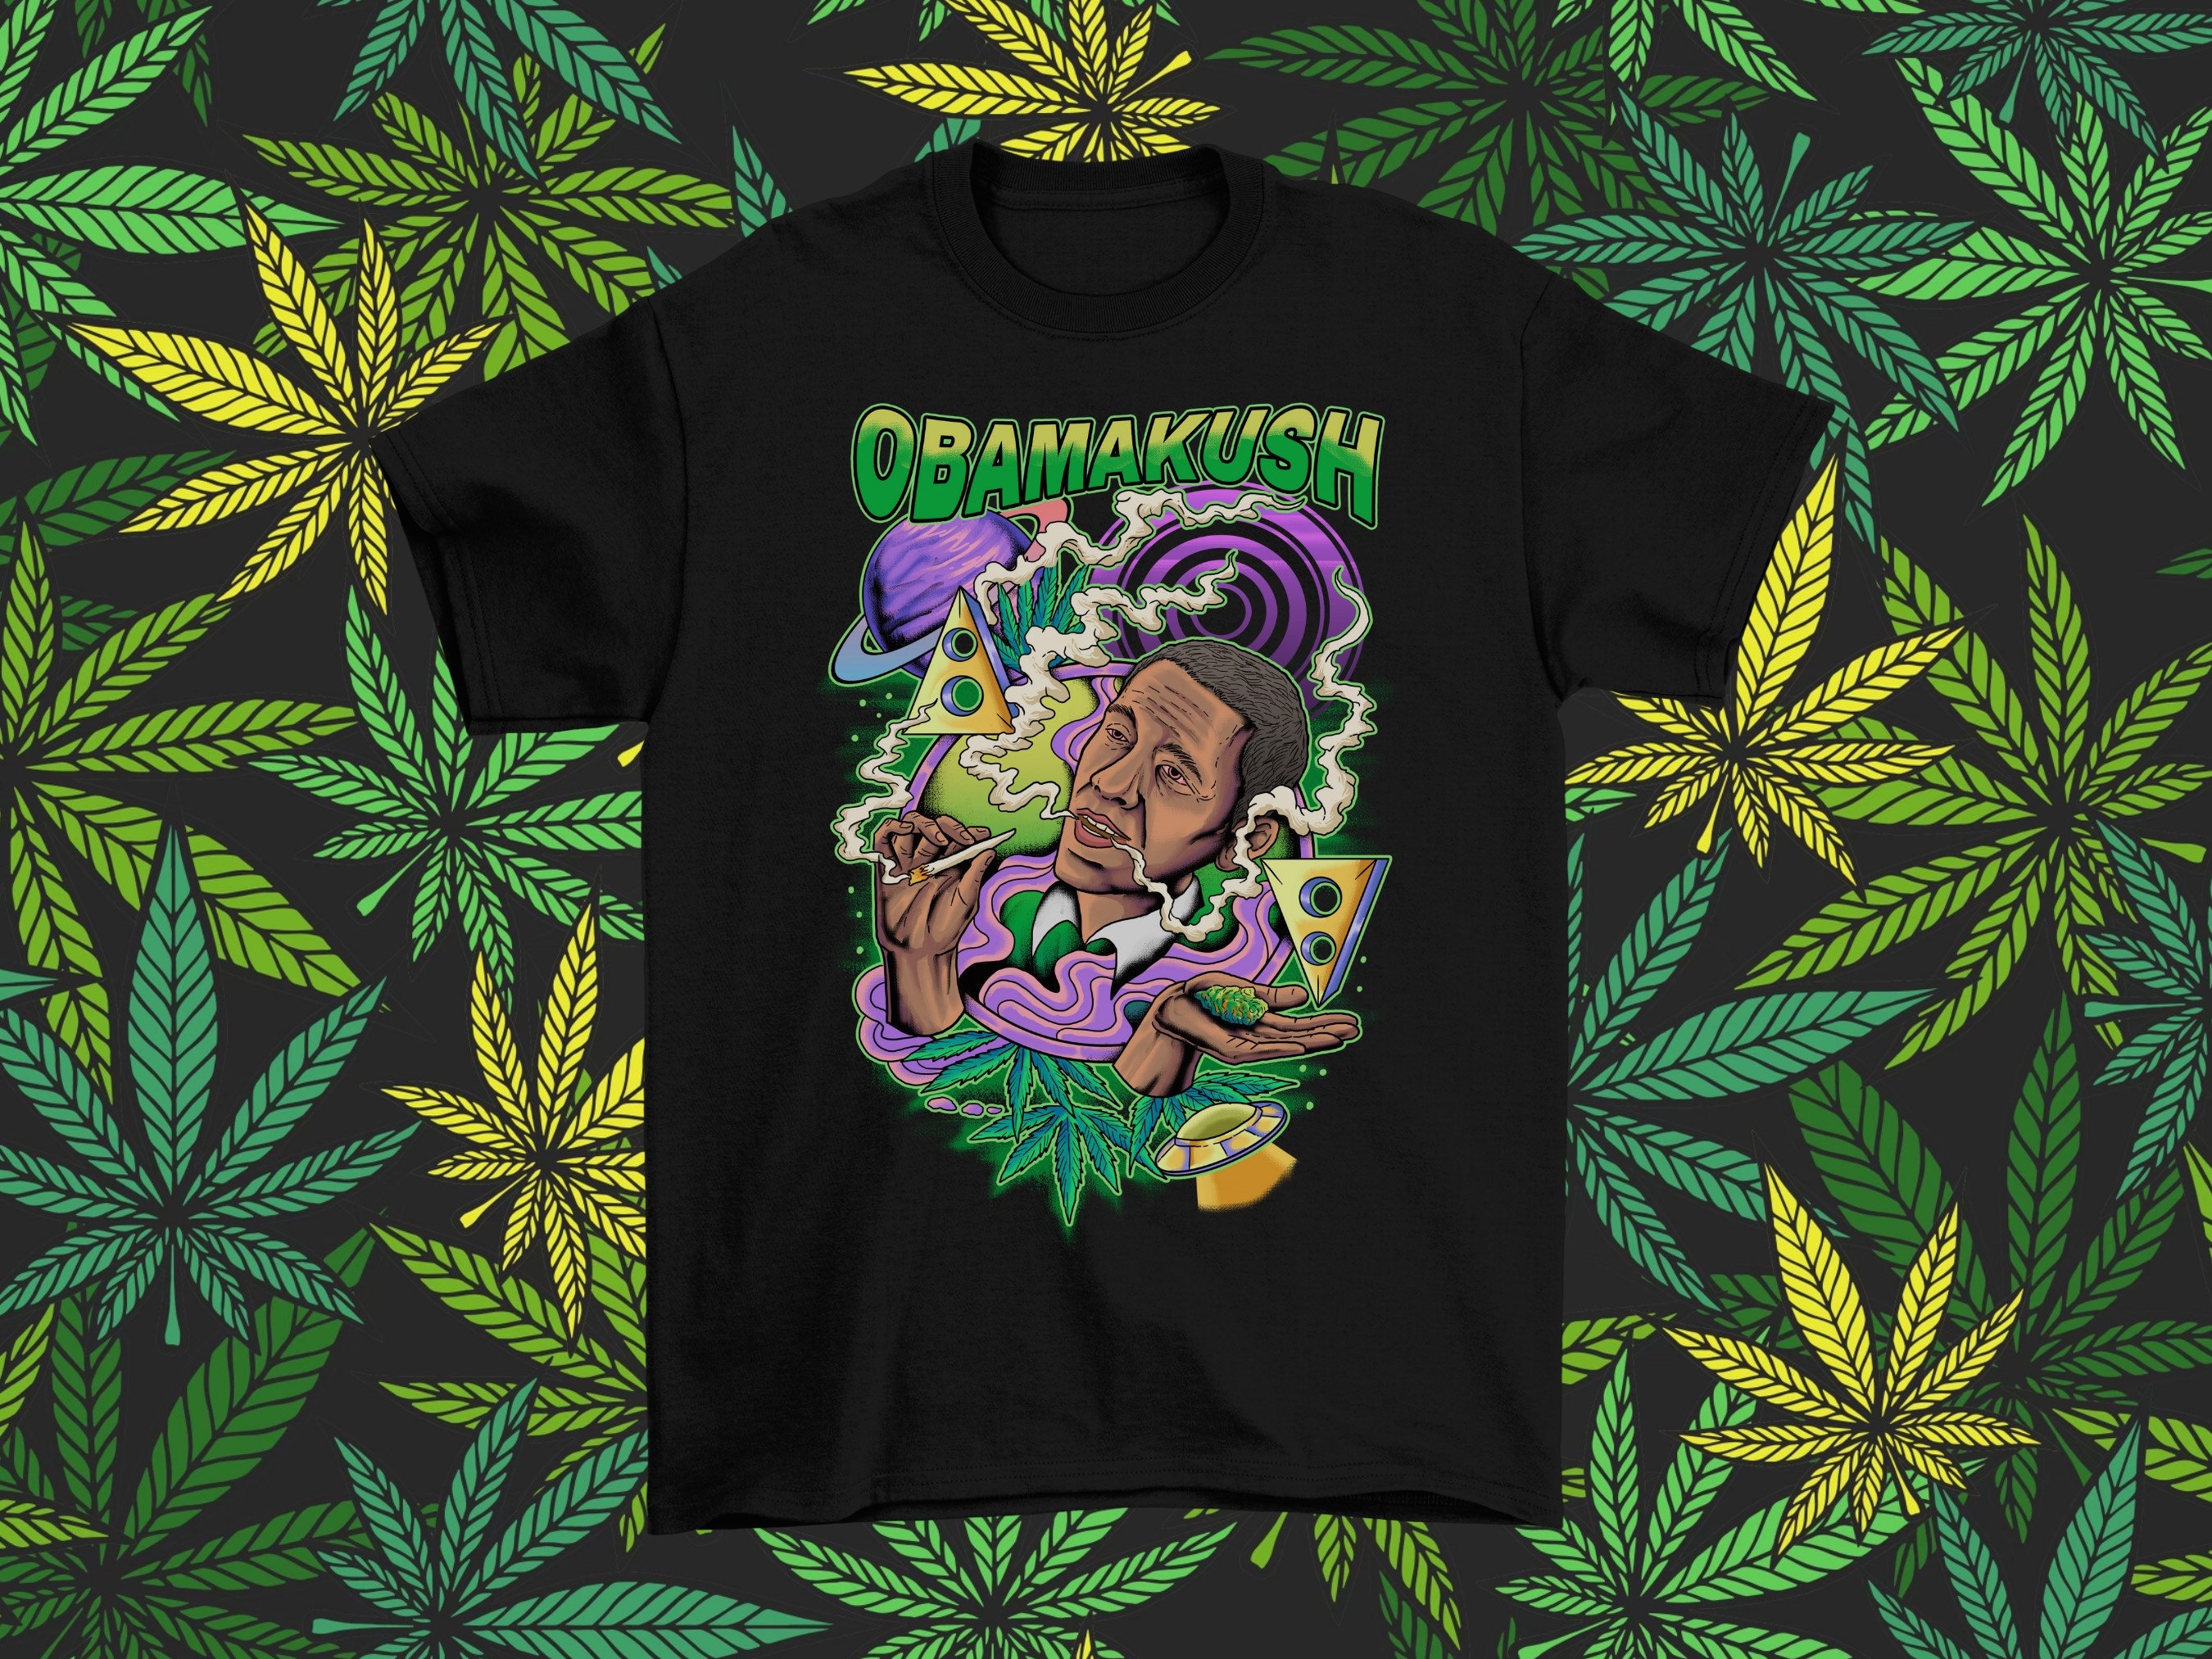 Personable, Playful, Cannabis T-shirt Design for SD by SATHIRA